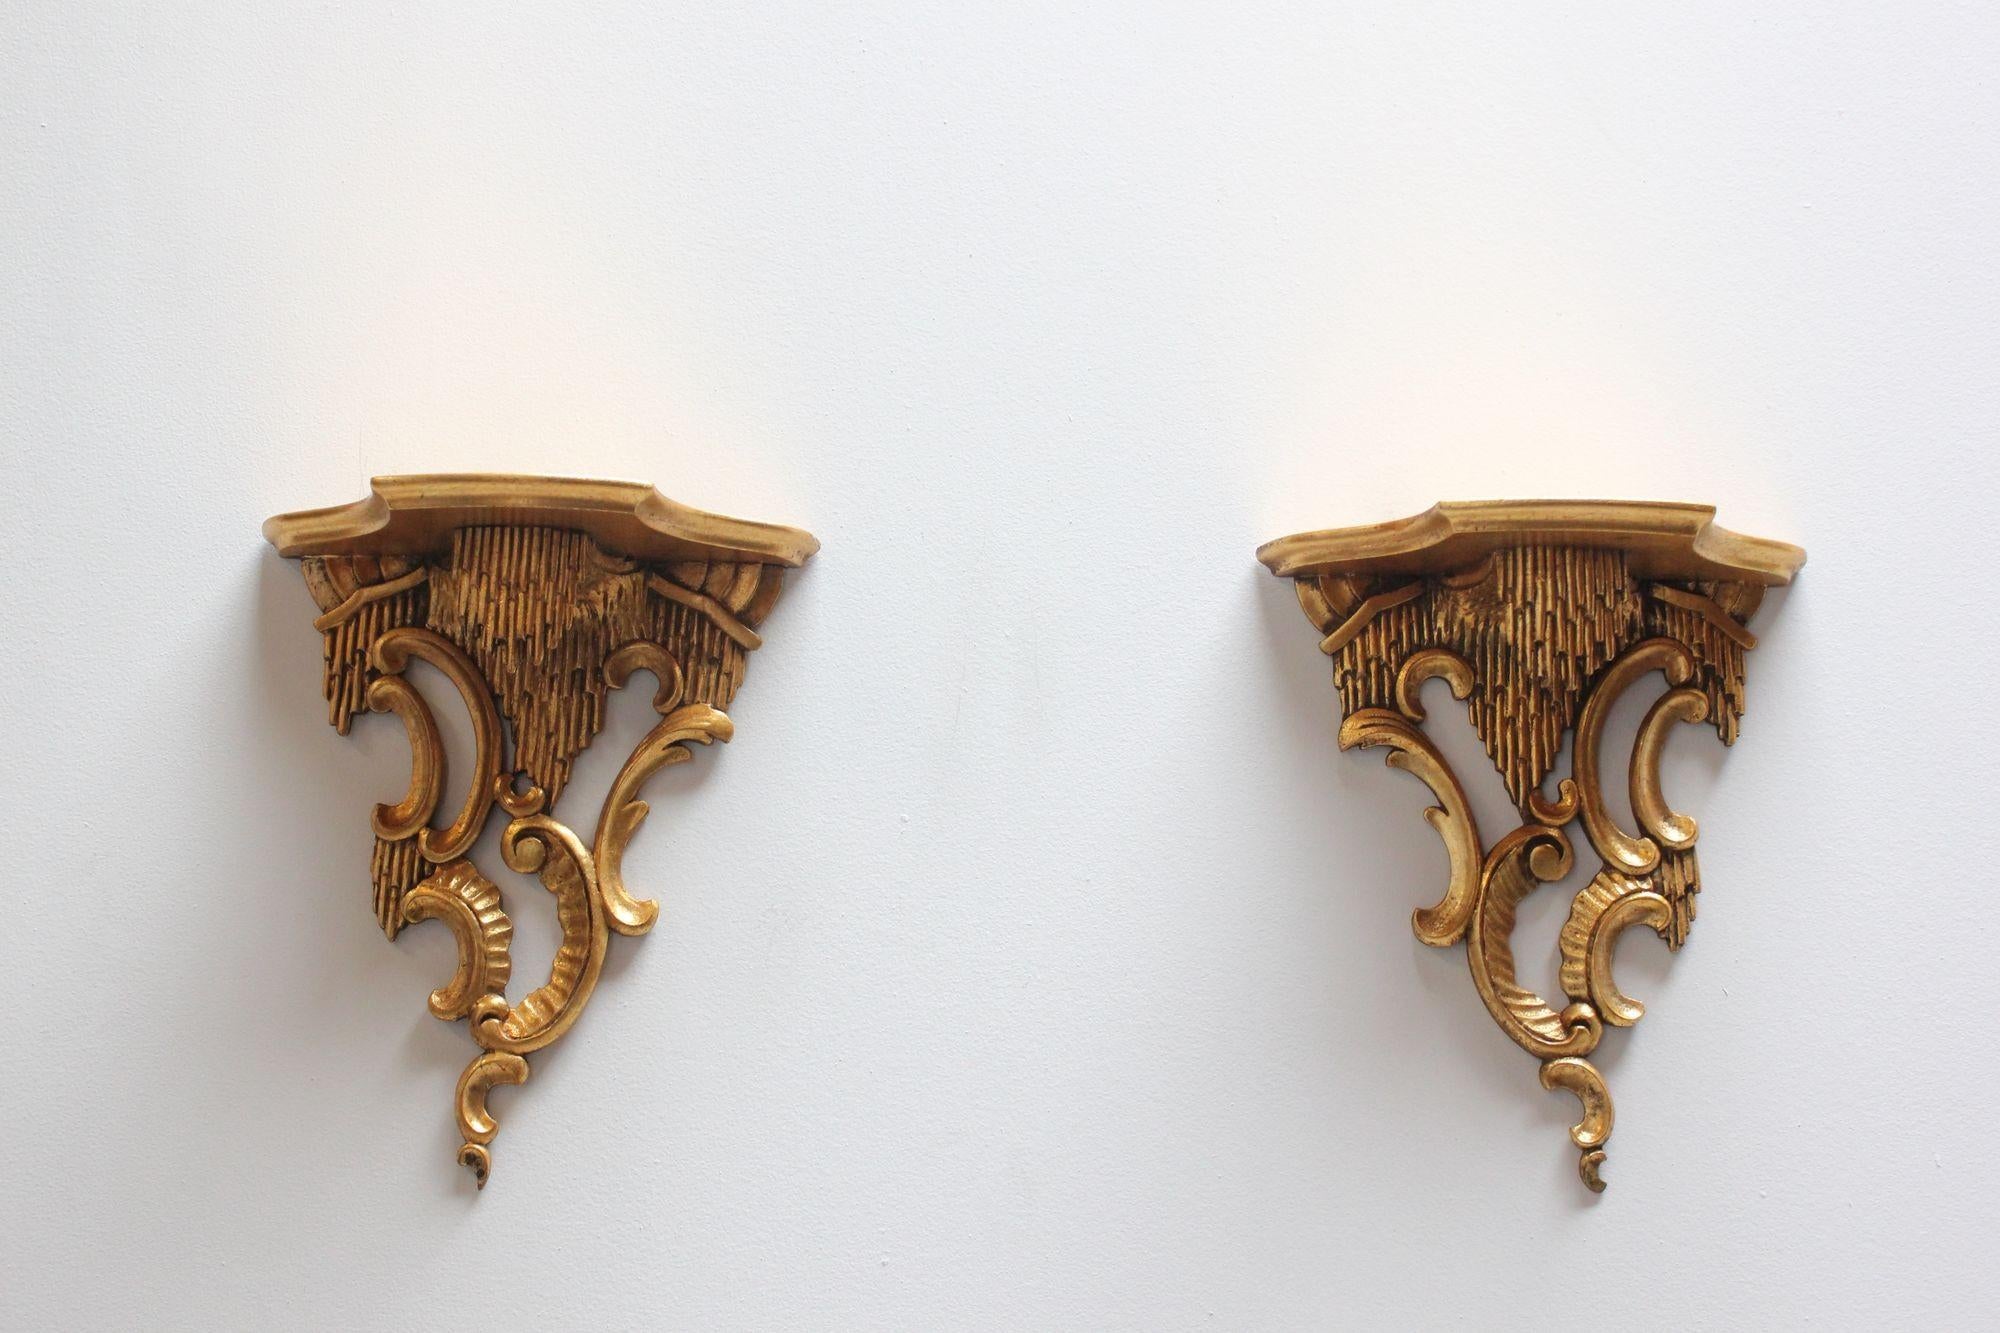 Pair of Italian Rococo-Style Rocaille Giltwood Wall Brackets For Sale 12